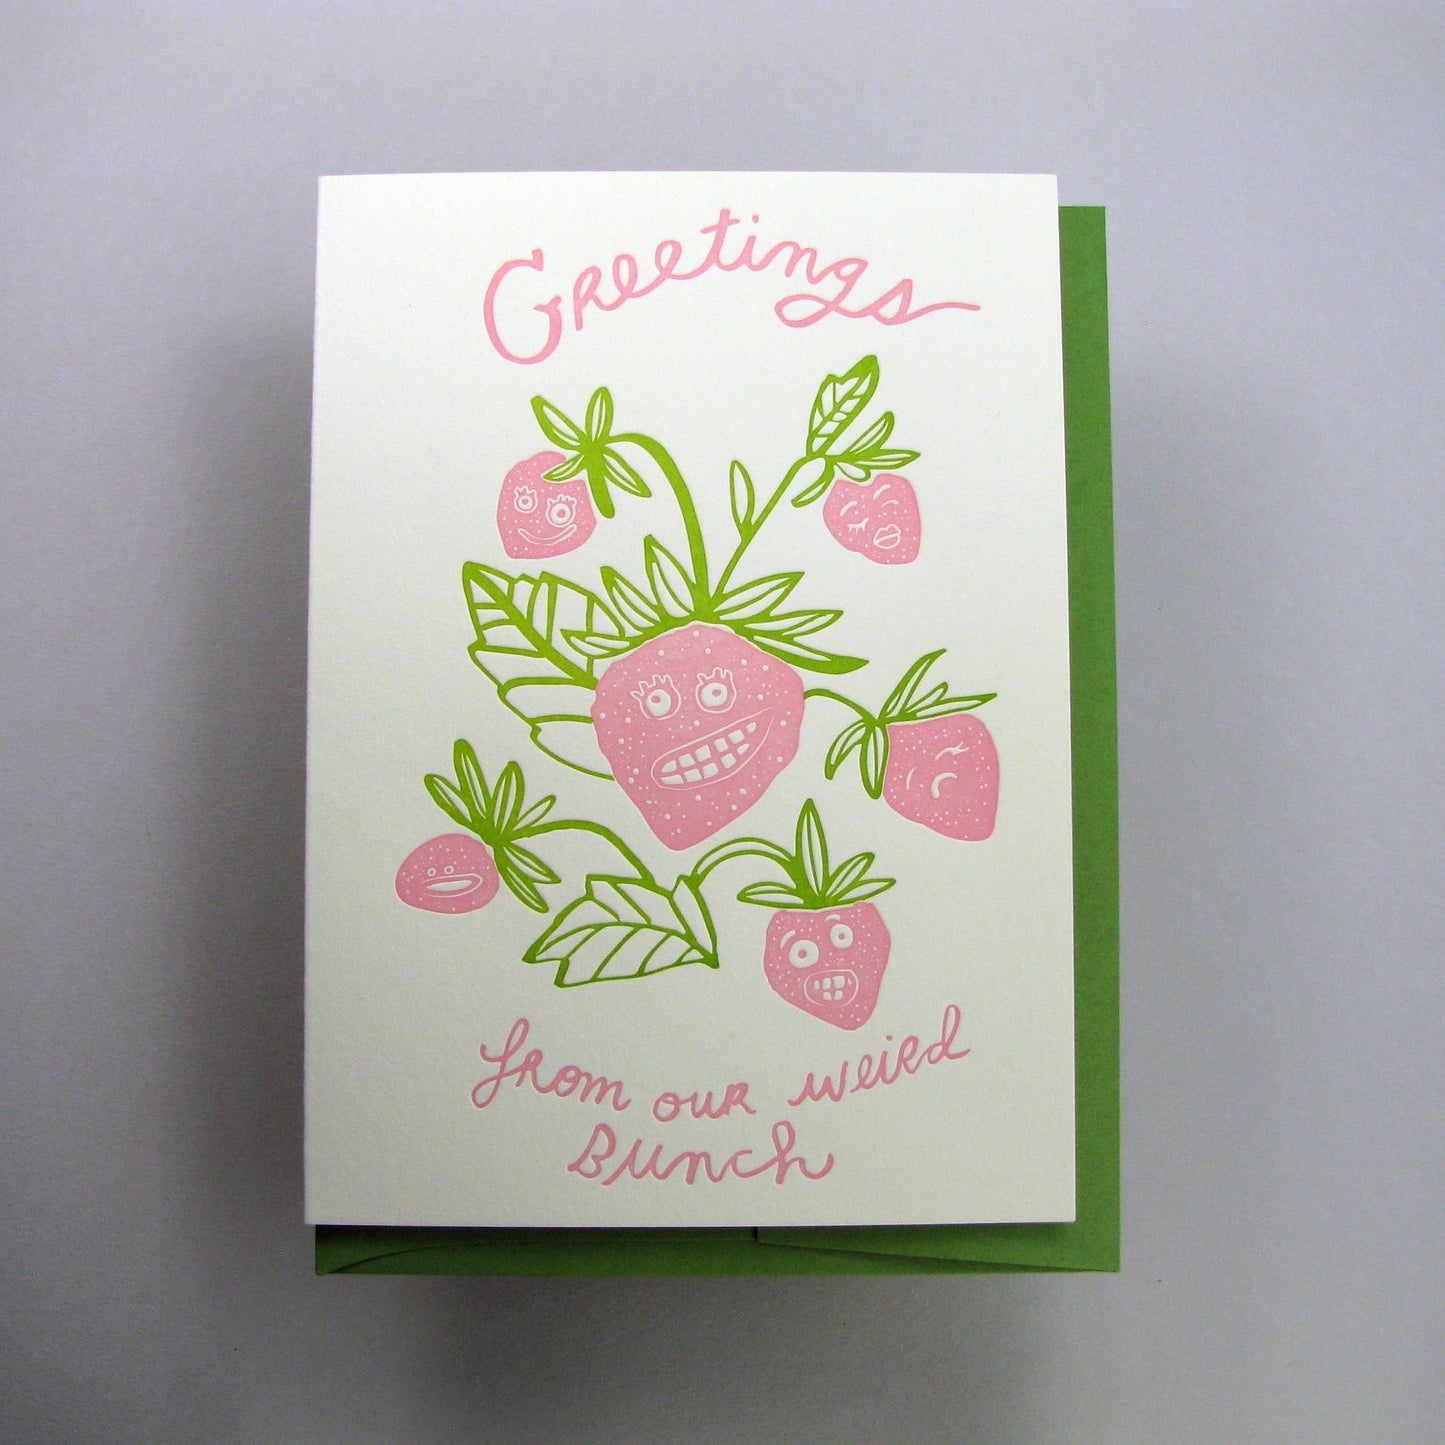 Greeting card that reads "Greetings from our weird bunch" with an illustration of a strawberry bunch with different silly faces on them 